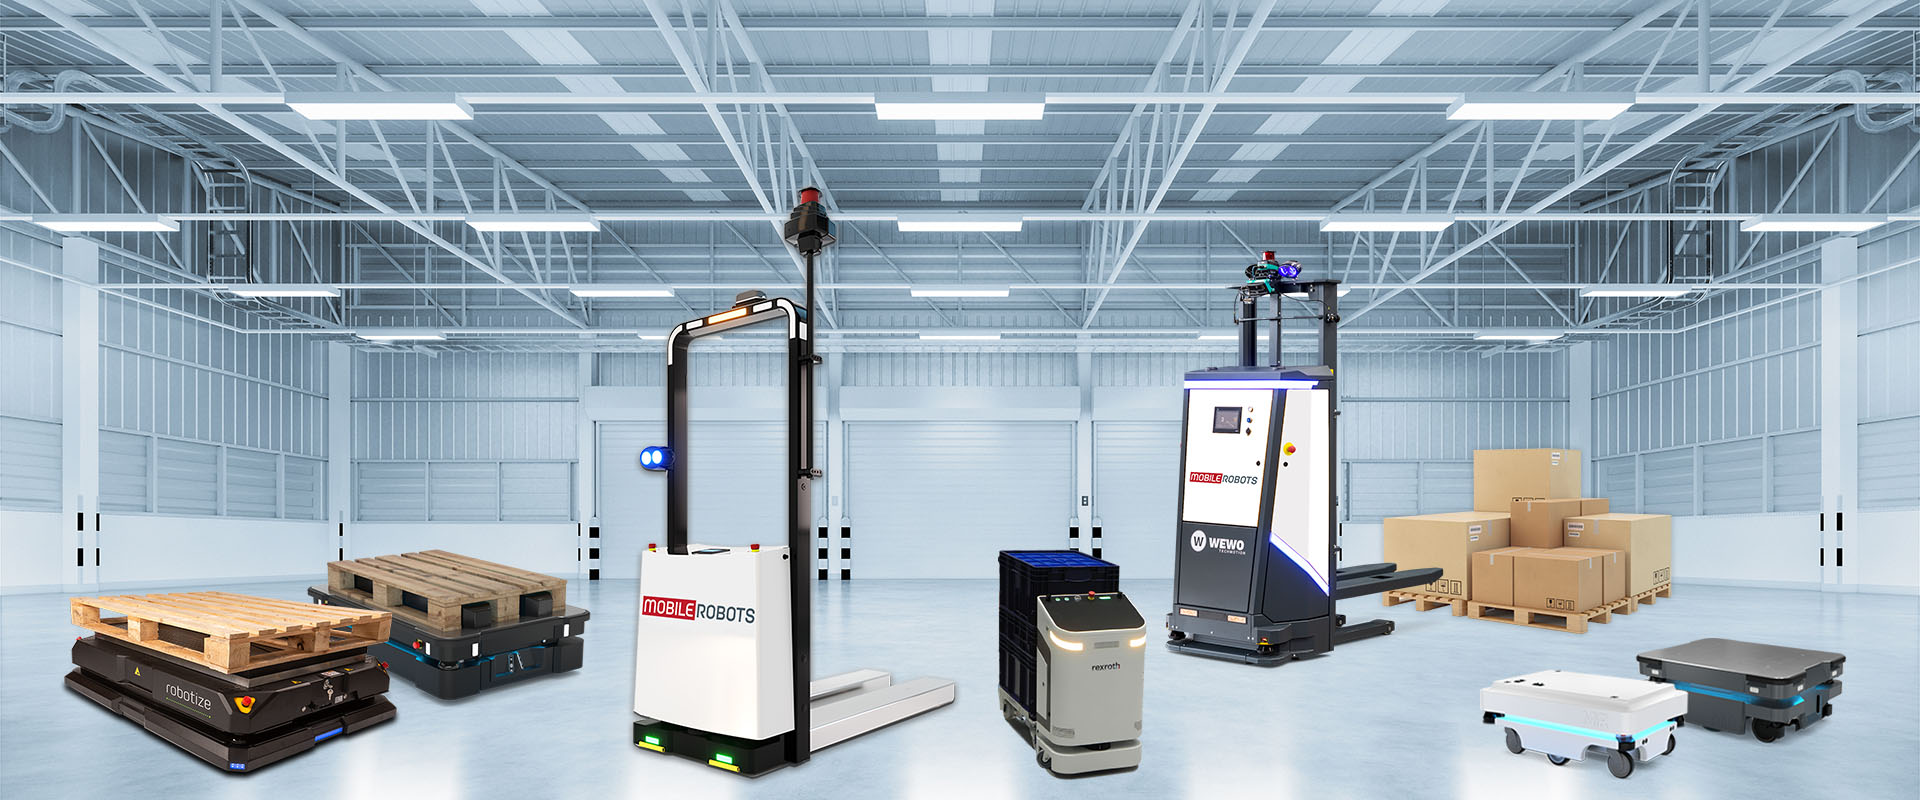 You will find automated guided vehicles for the automation of your intralogistics at MOBILE ROBOTS by DAHL Robotics, your integrator for autonomous mobile robots.